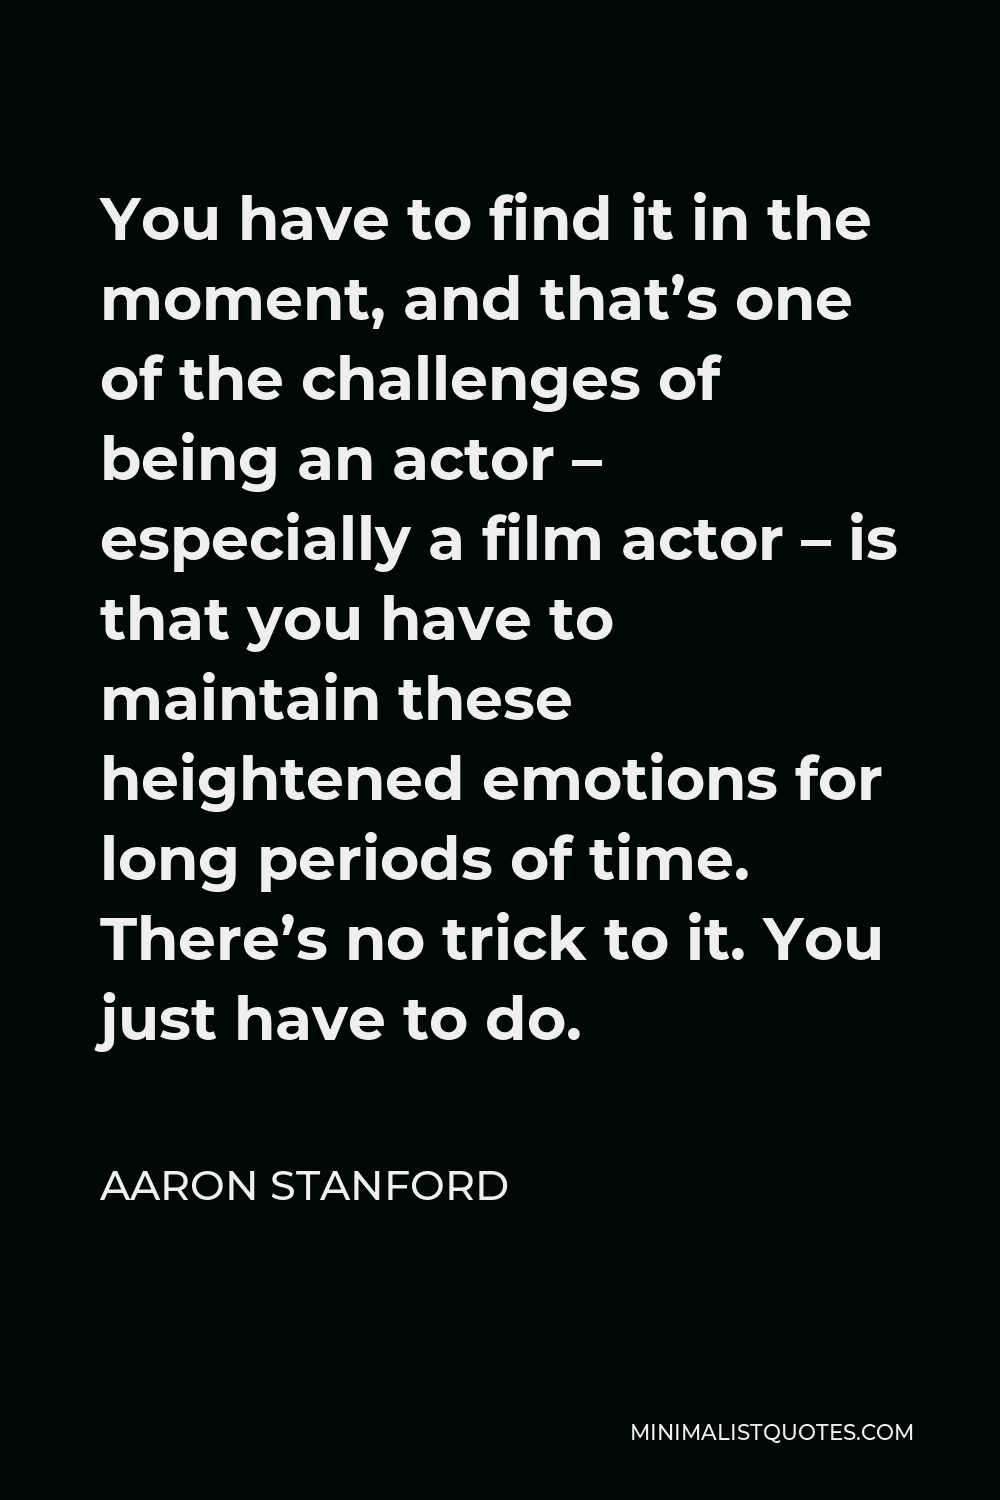 Aaron Stanford Quote You Have To Find It In The Moment And That S One Of The Challenges Of